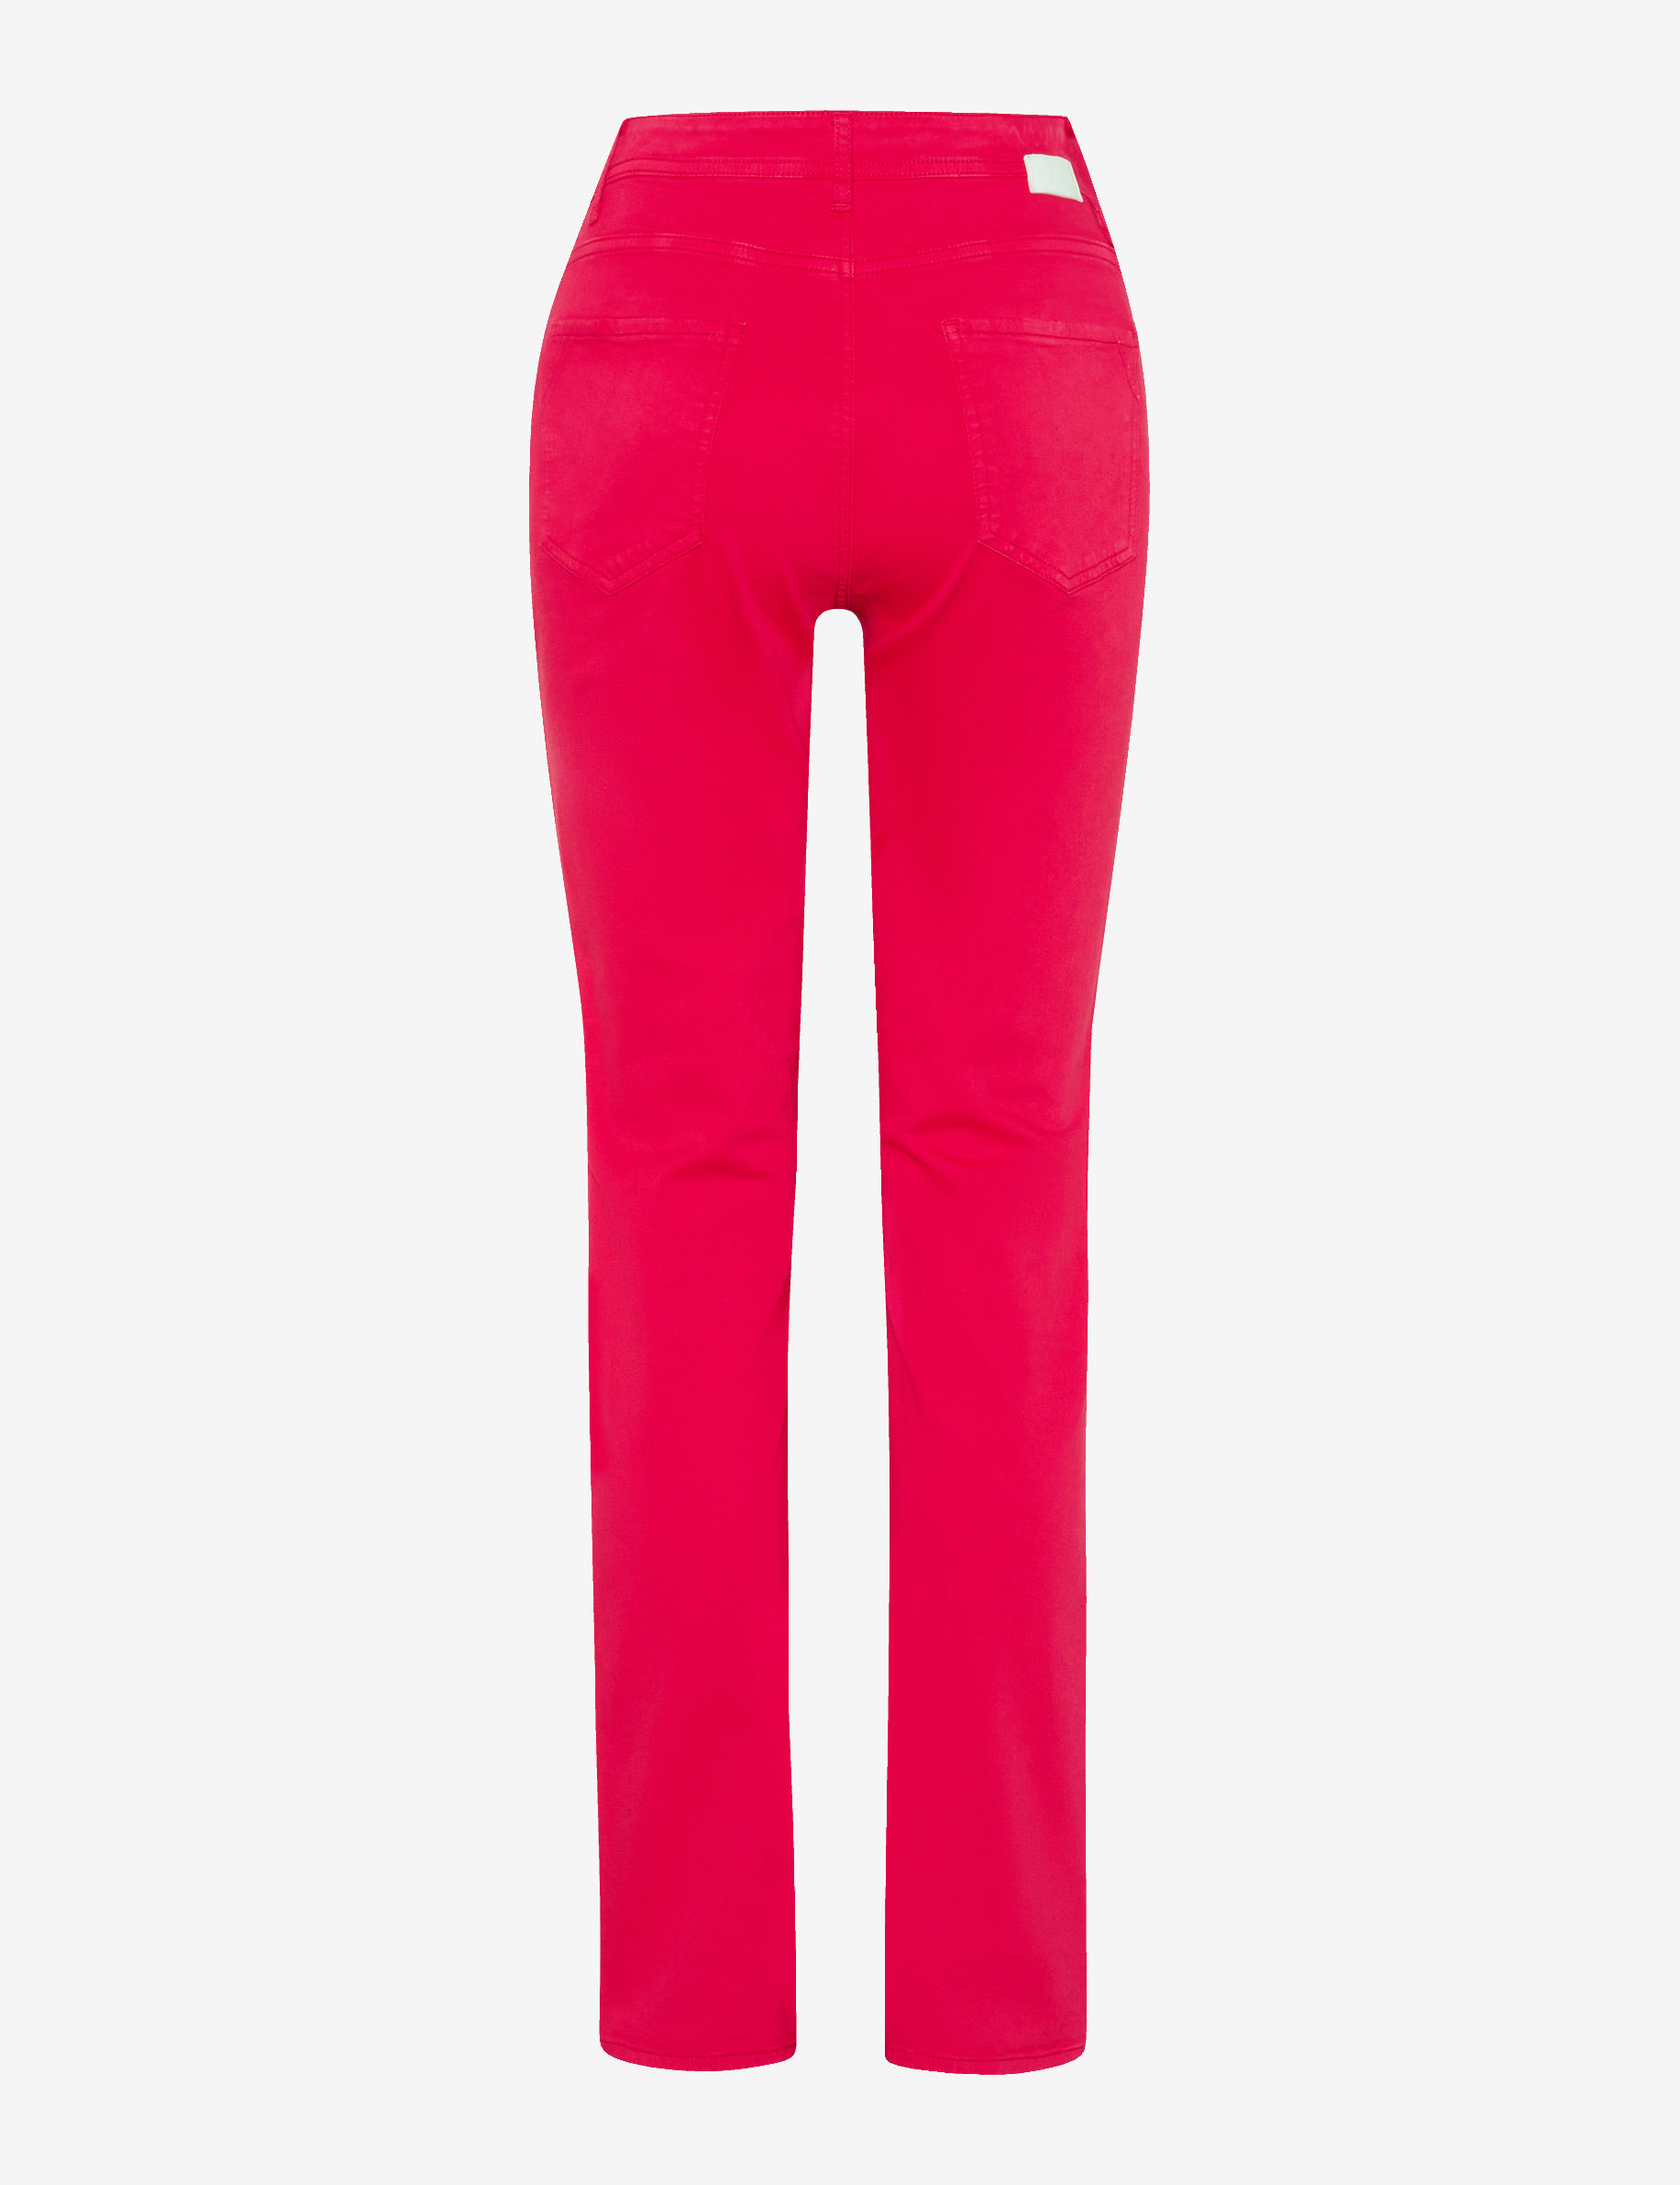 Women Style MARY MAGENTA Regular Fit Stand-alone rear view